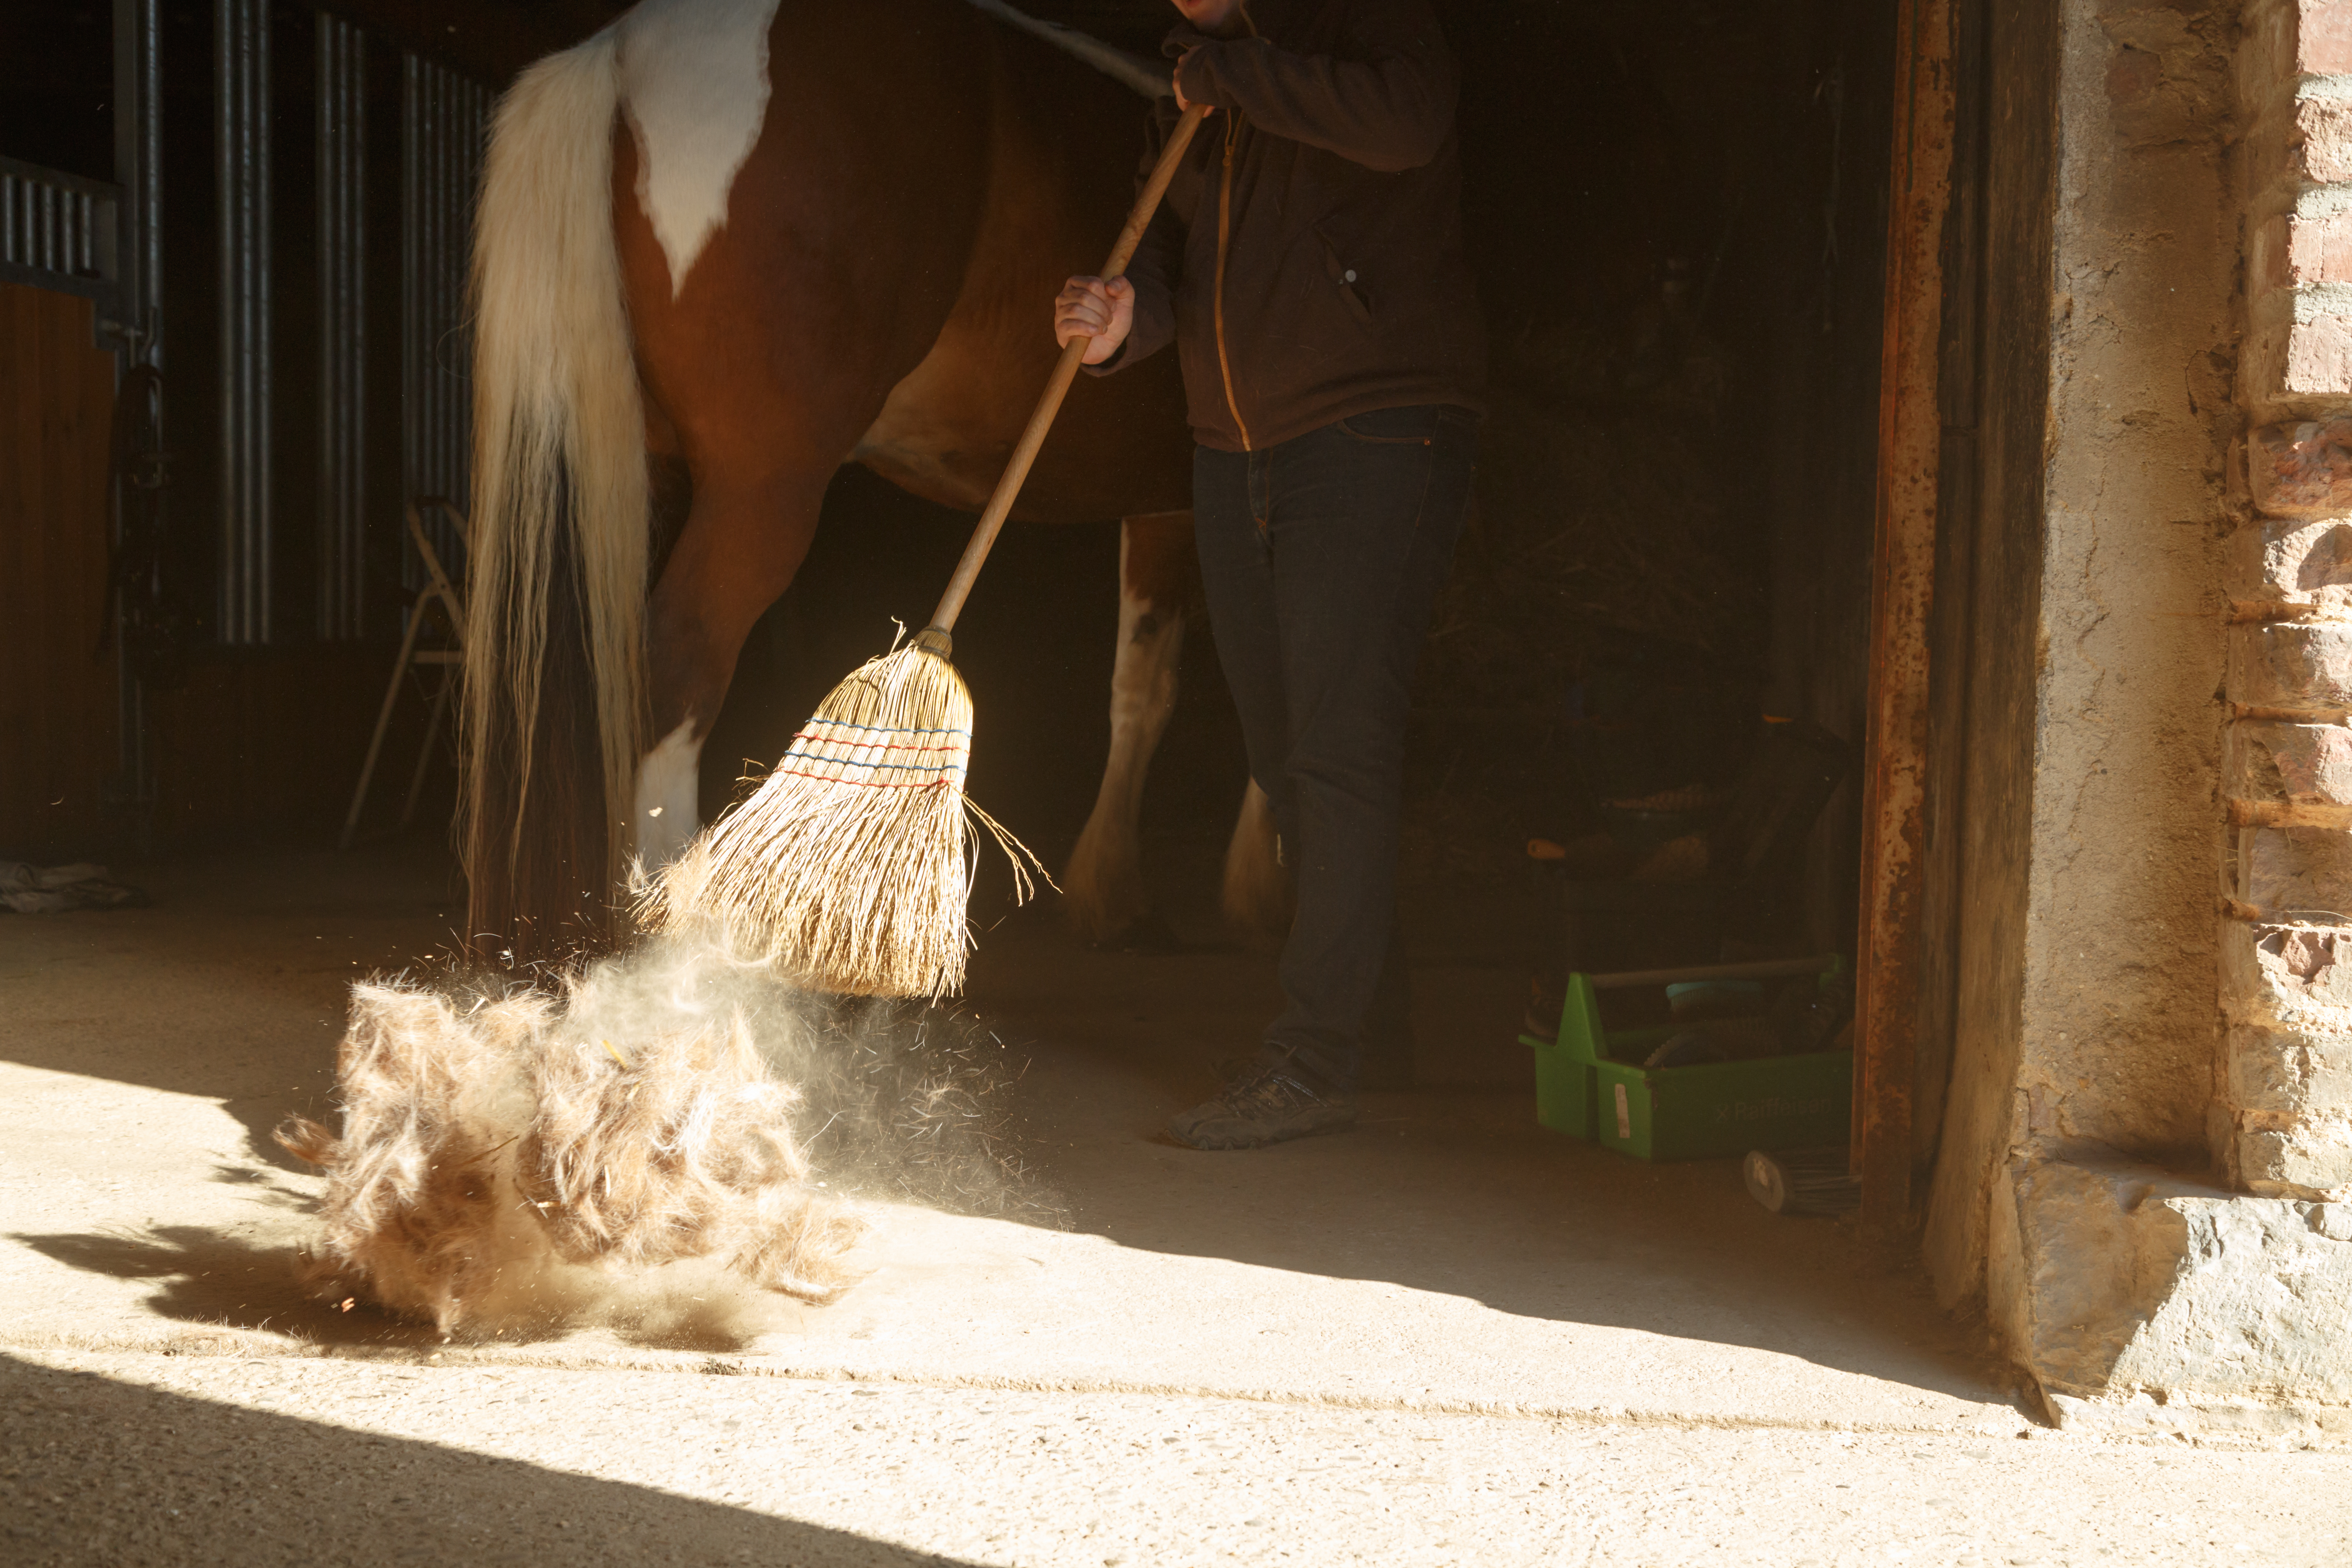 A woman sweeping in a barn
